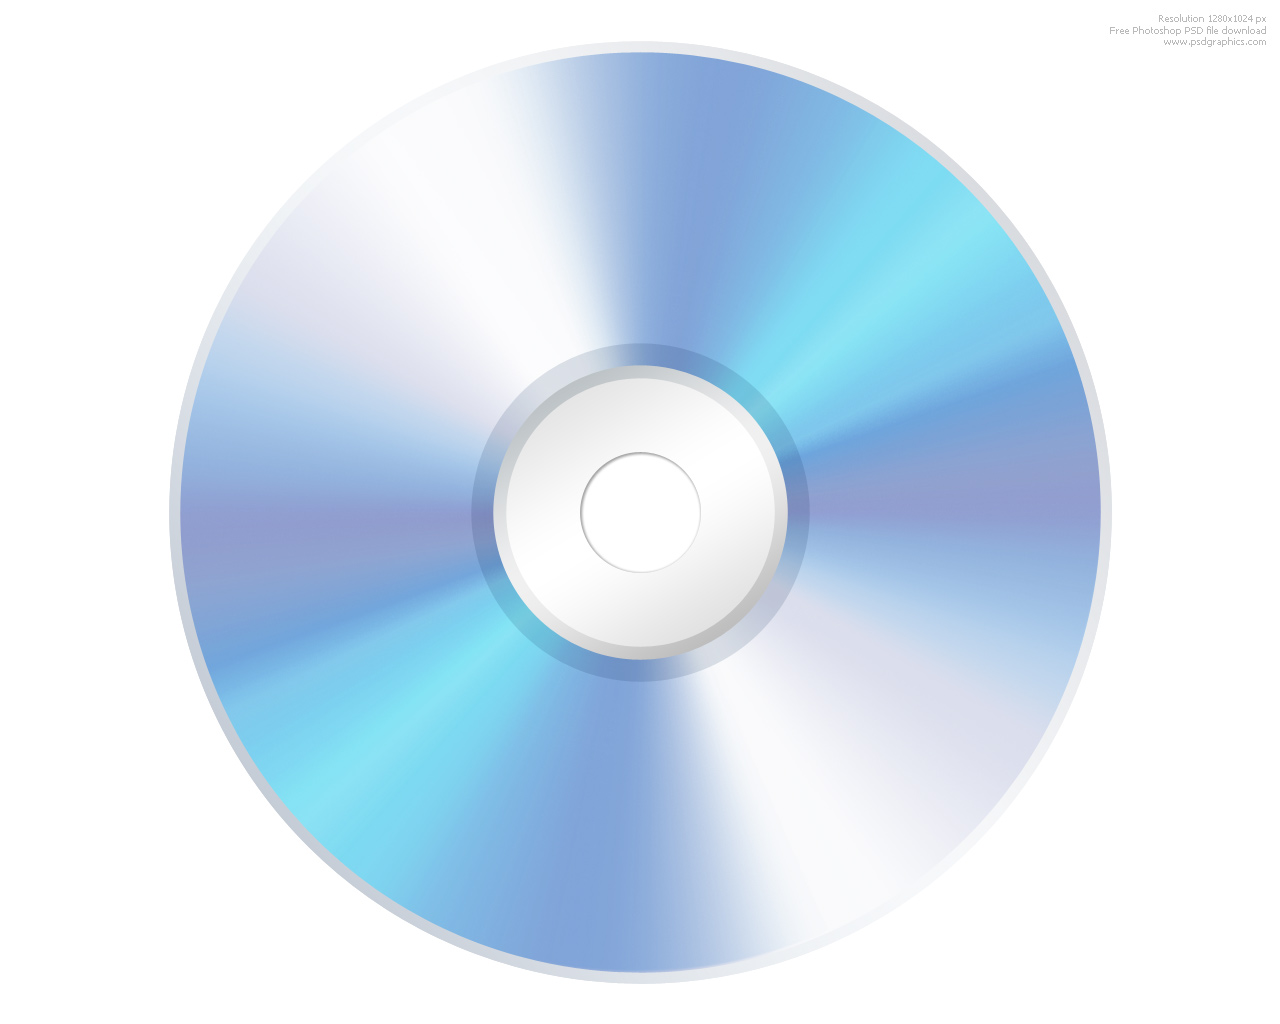 Best photos of compact. Cd clipart shiny